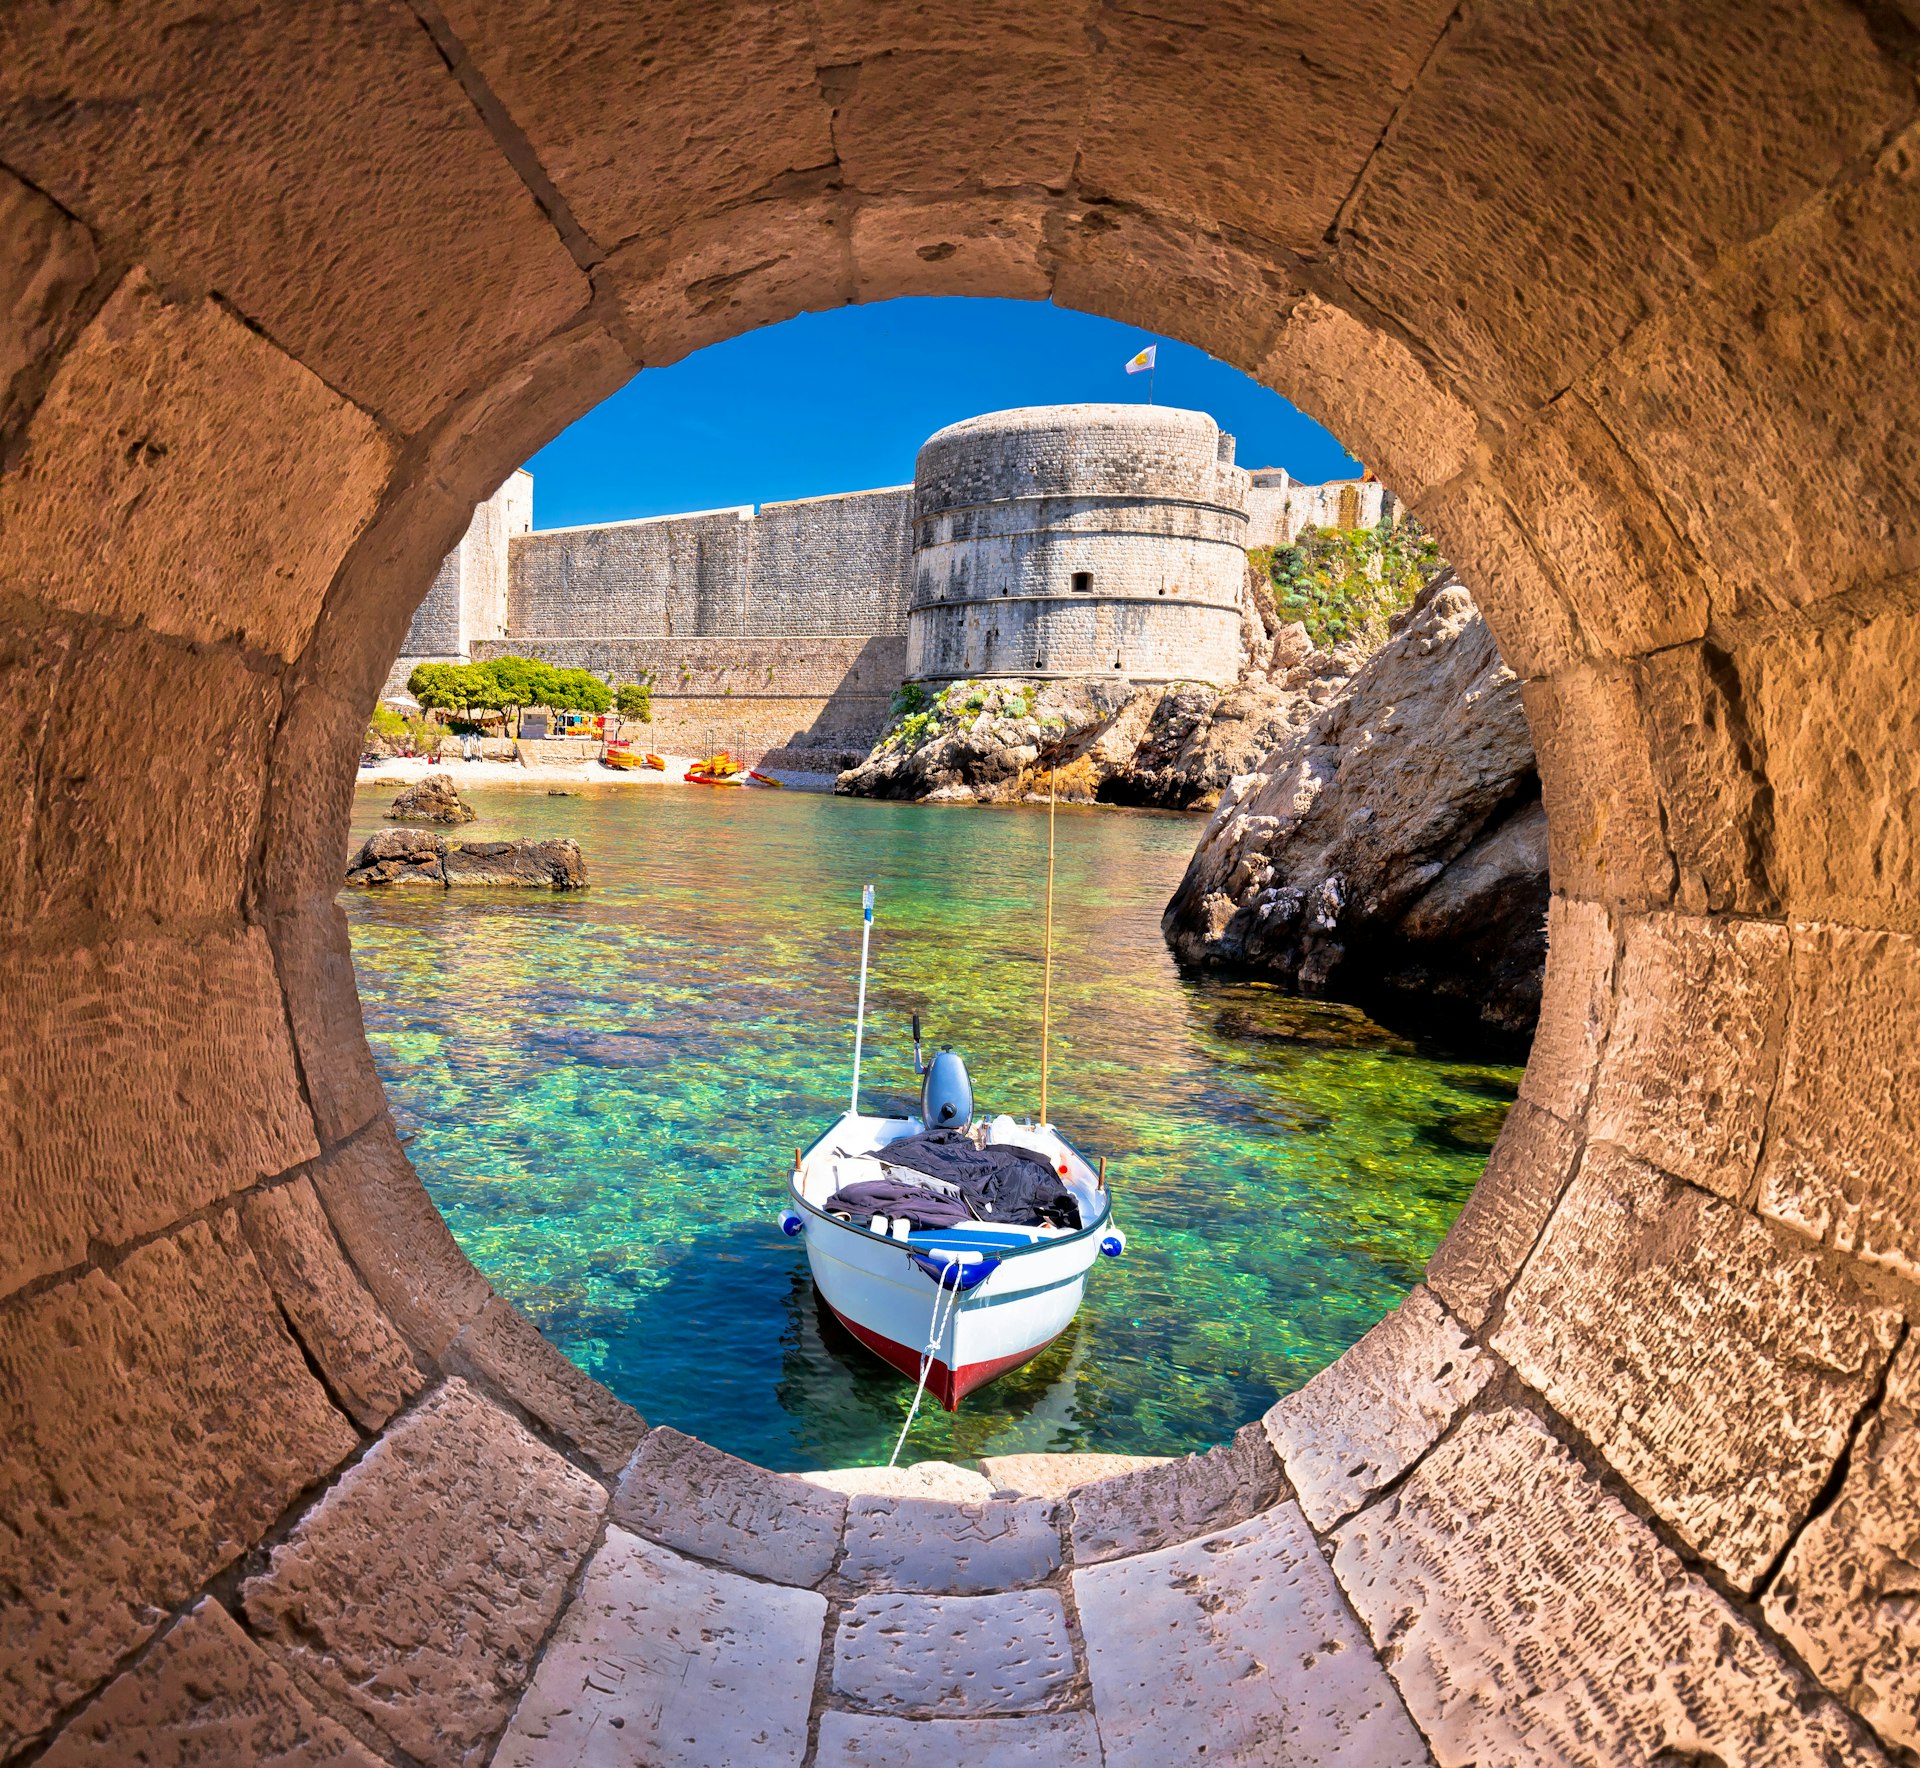 Dubrovnik's small harbor with a boat backed by huge city walls viewed through a stone circular window